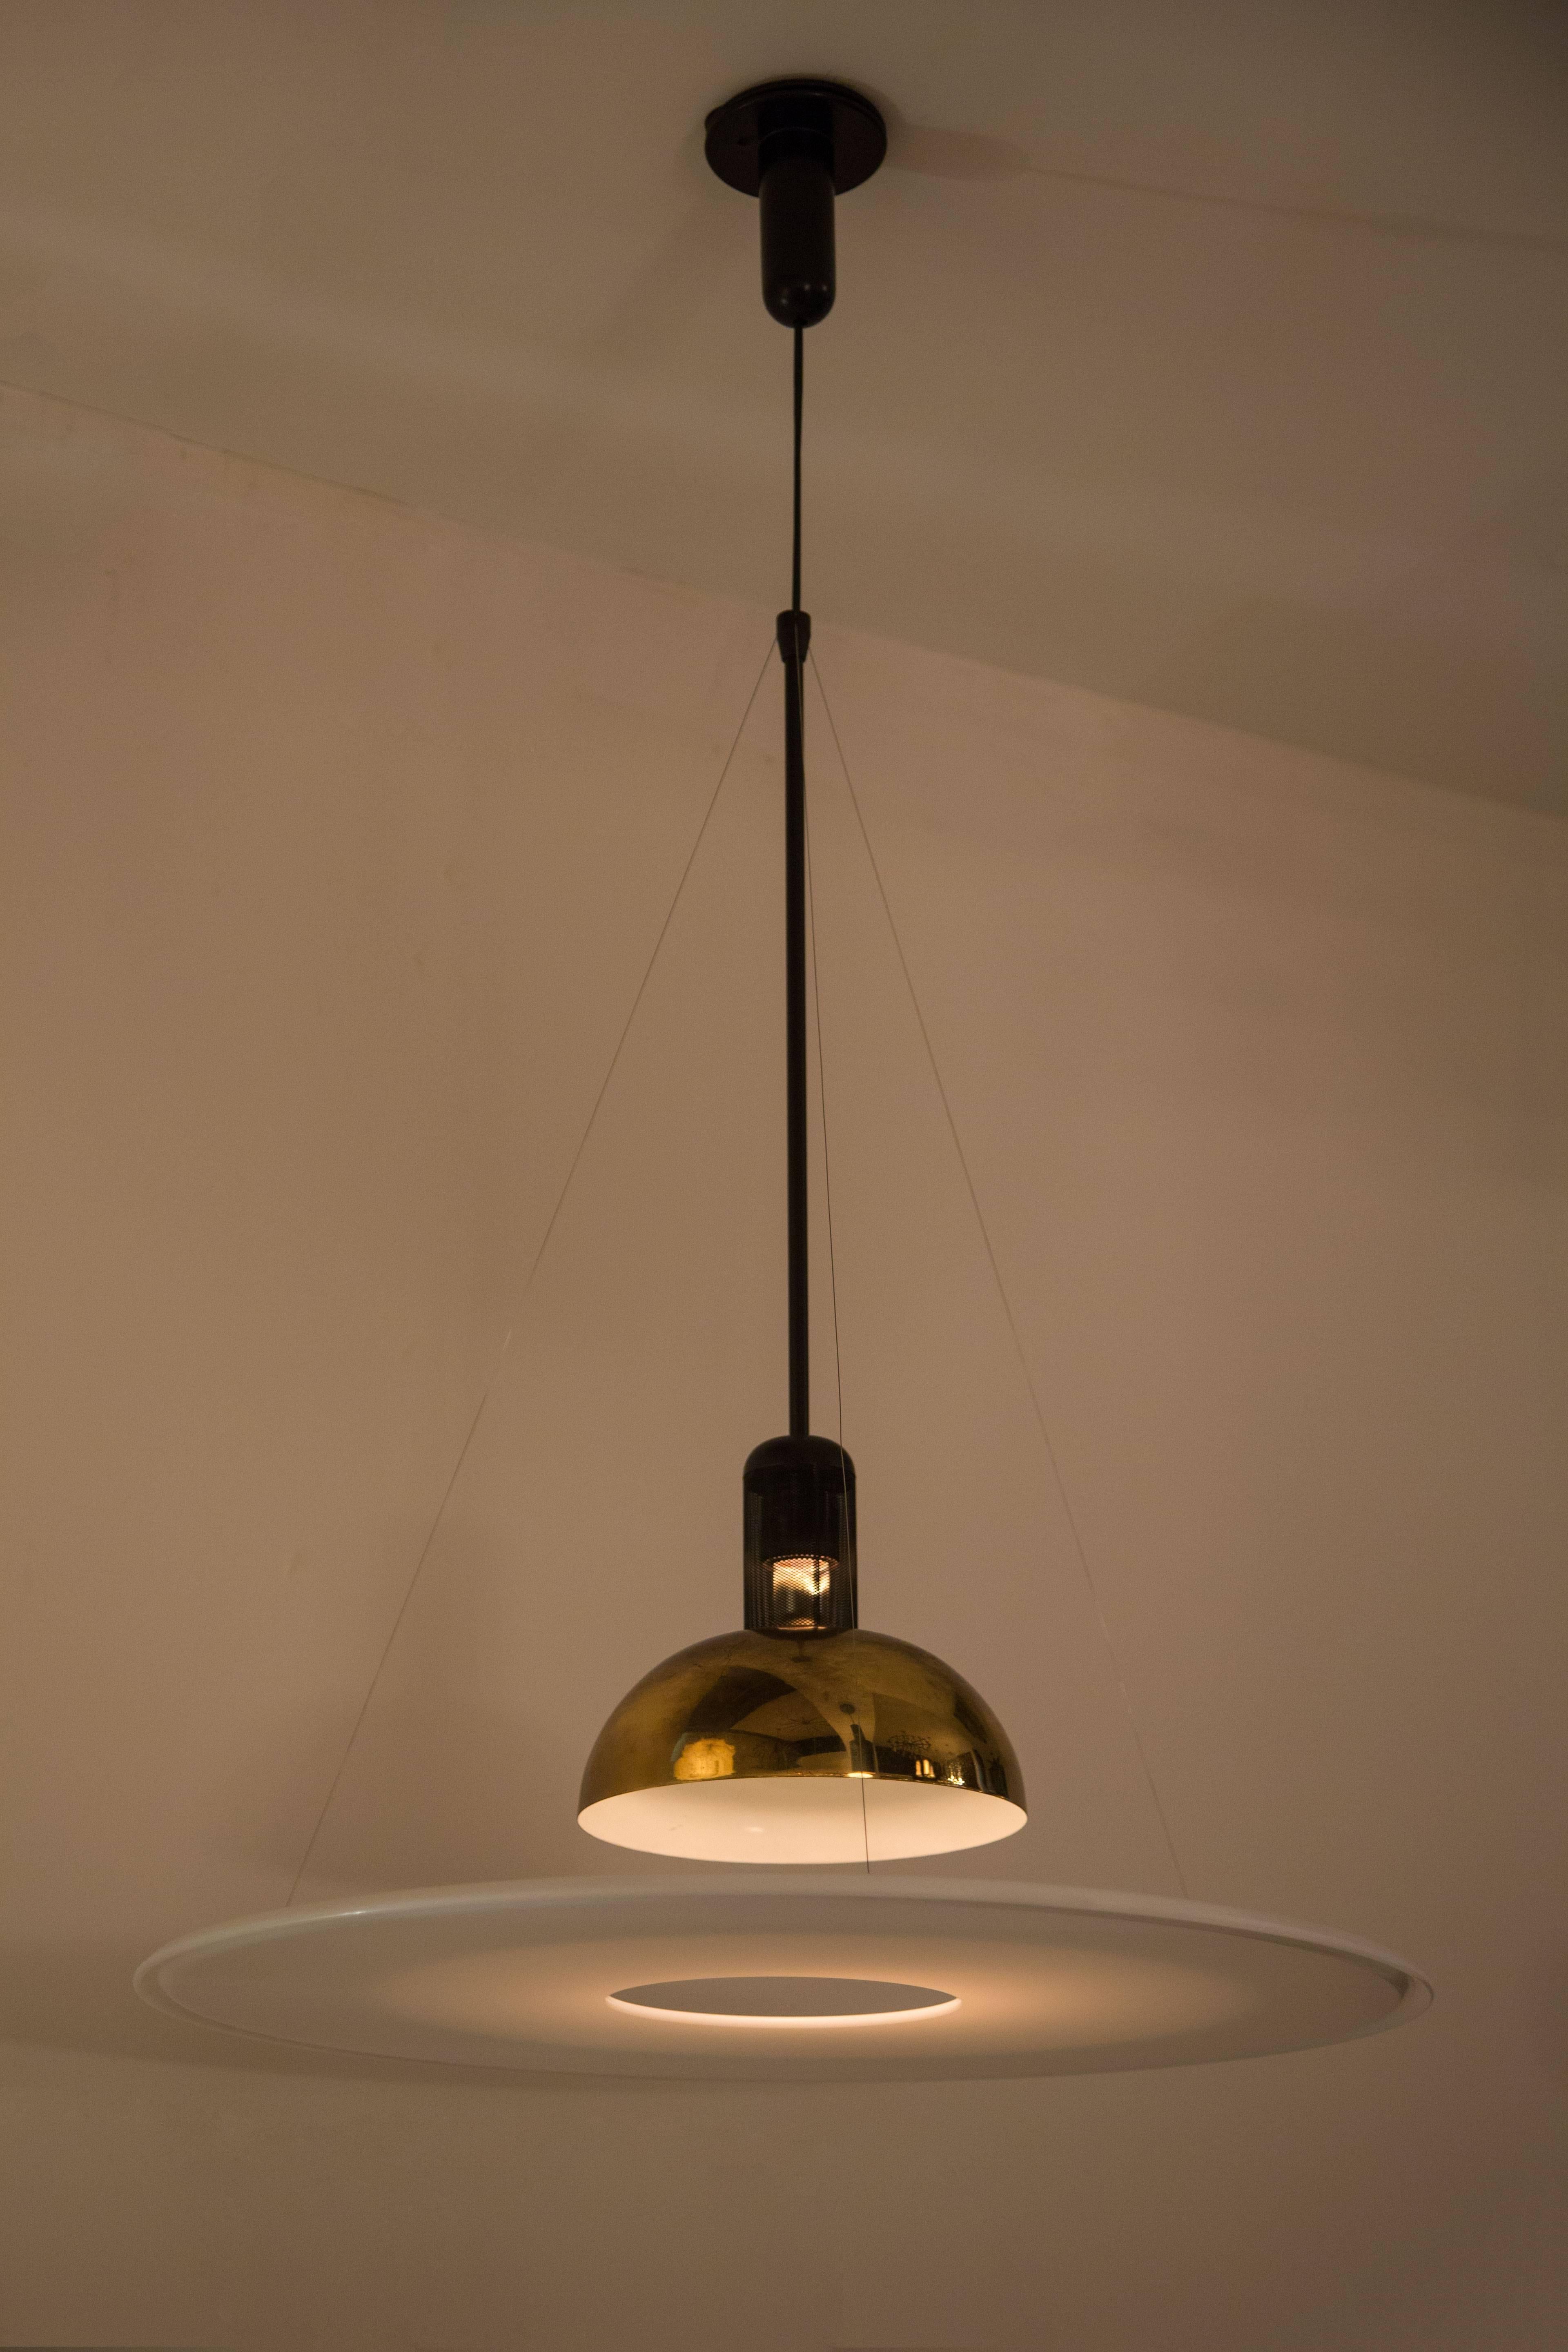 Original pendant light designed in 1978 by Achille Castiglione. The Frisbi provides direct, diffused and reflected illumination. Opal acrylic diffuser is suspended by three fine steel cables. A black metal stem and wire mesh basket assembly secure